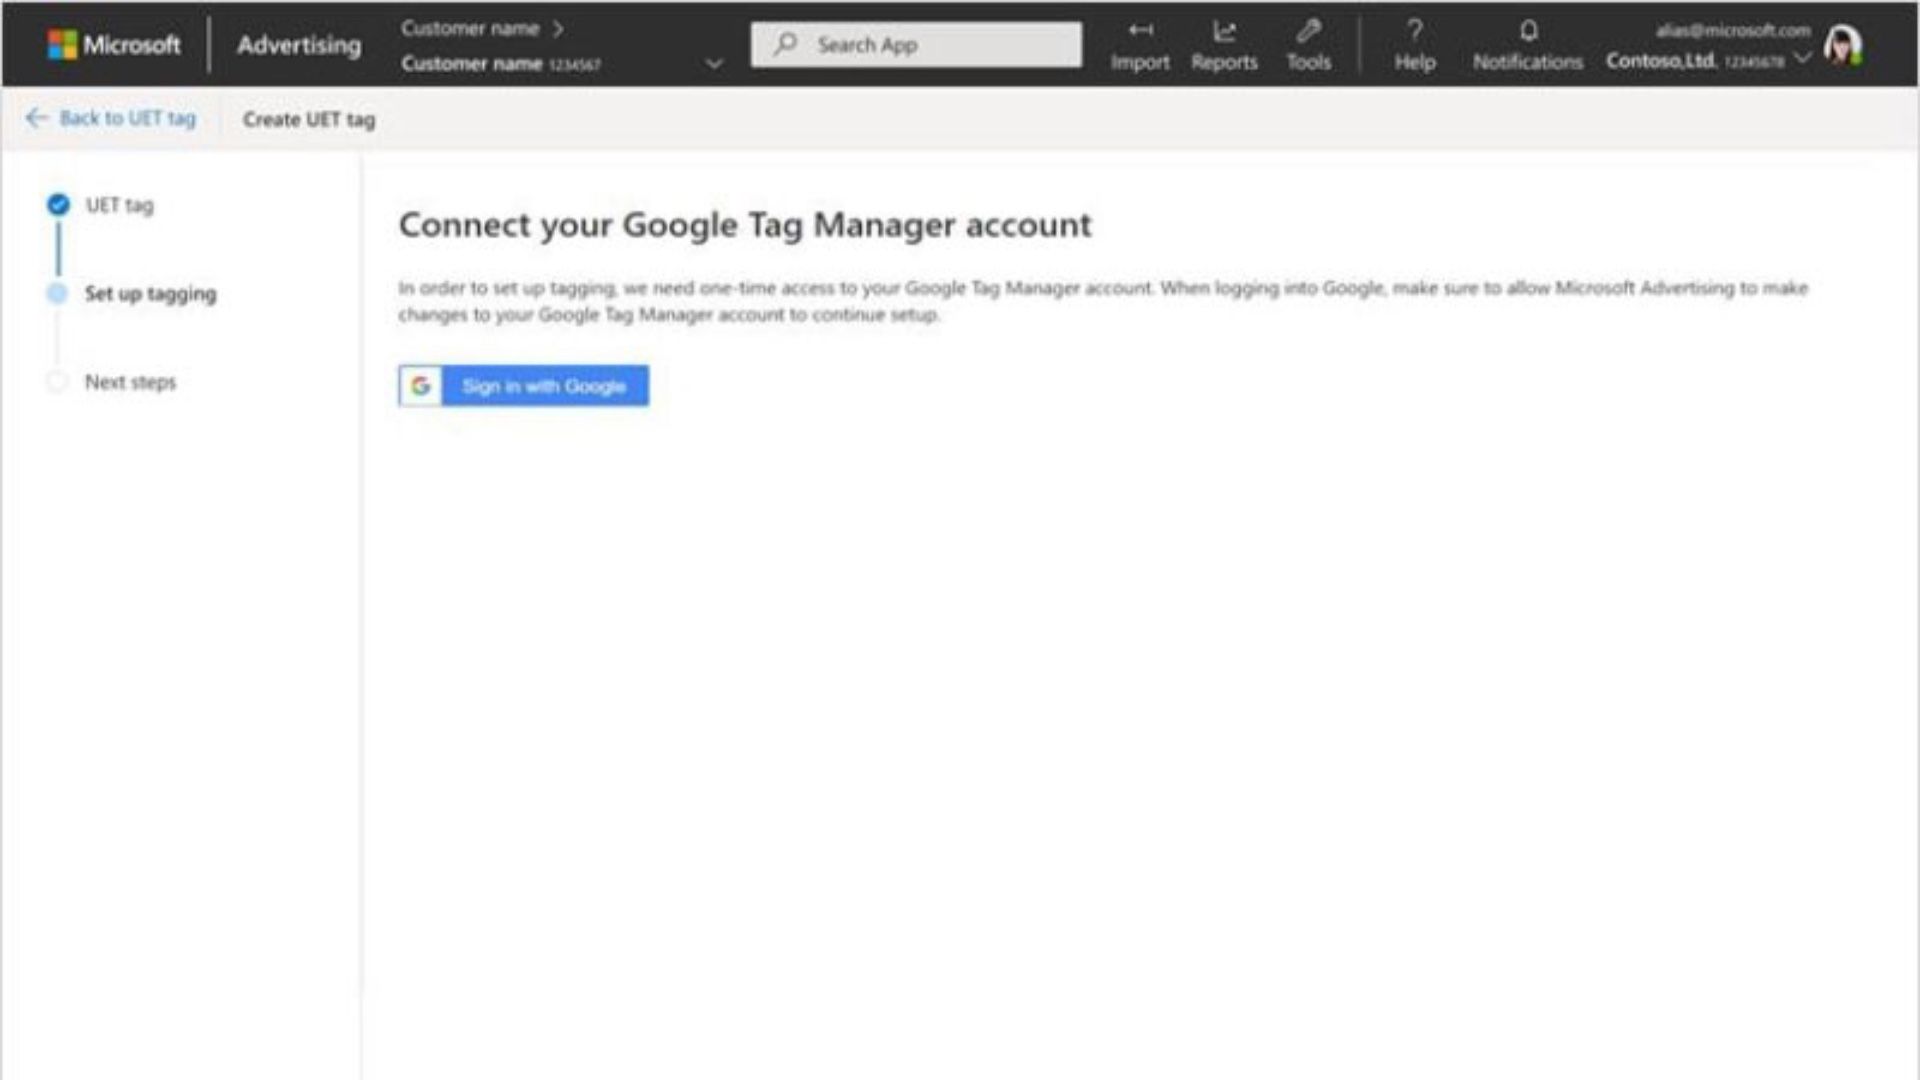 Microsoft Ads rolls out automated integration with Google Tag Manager